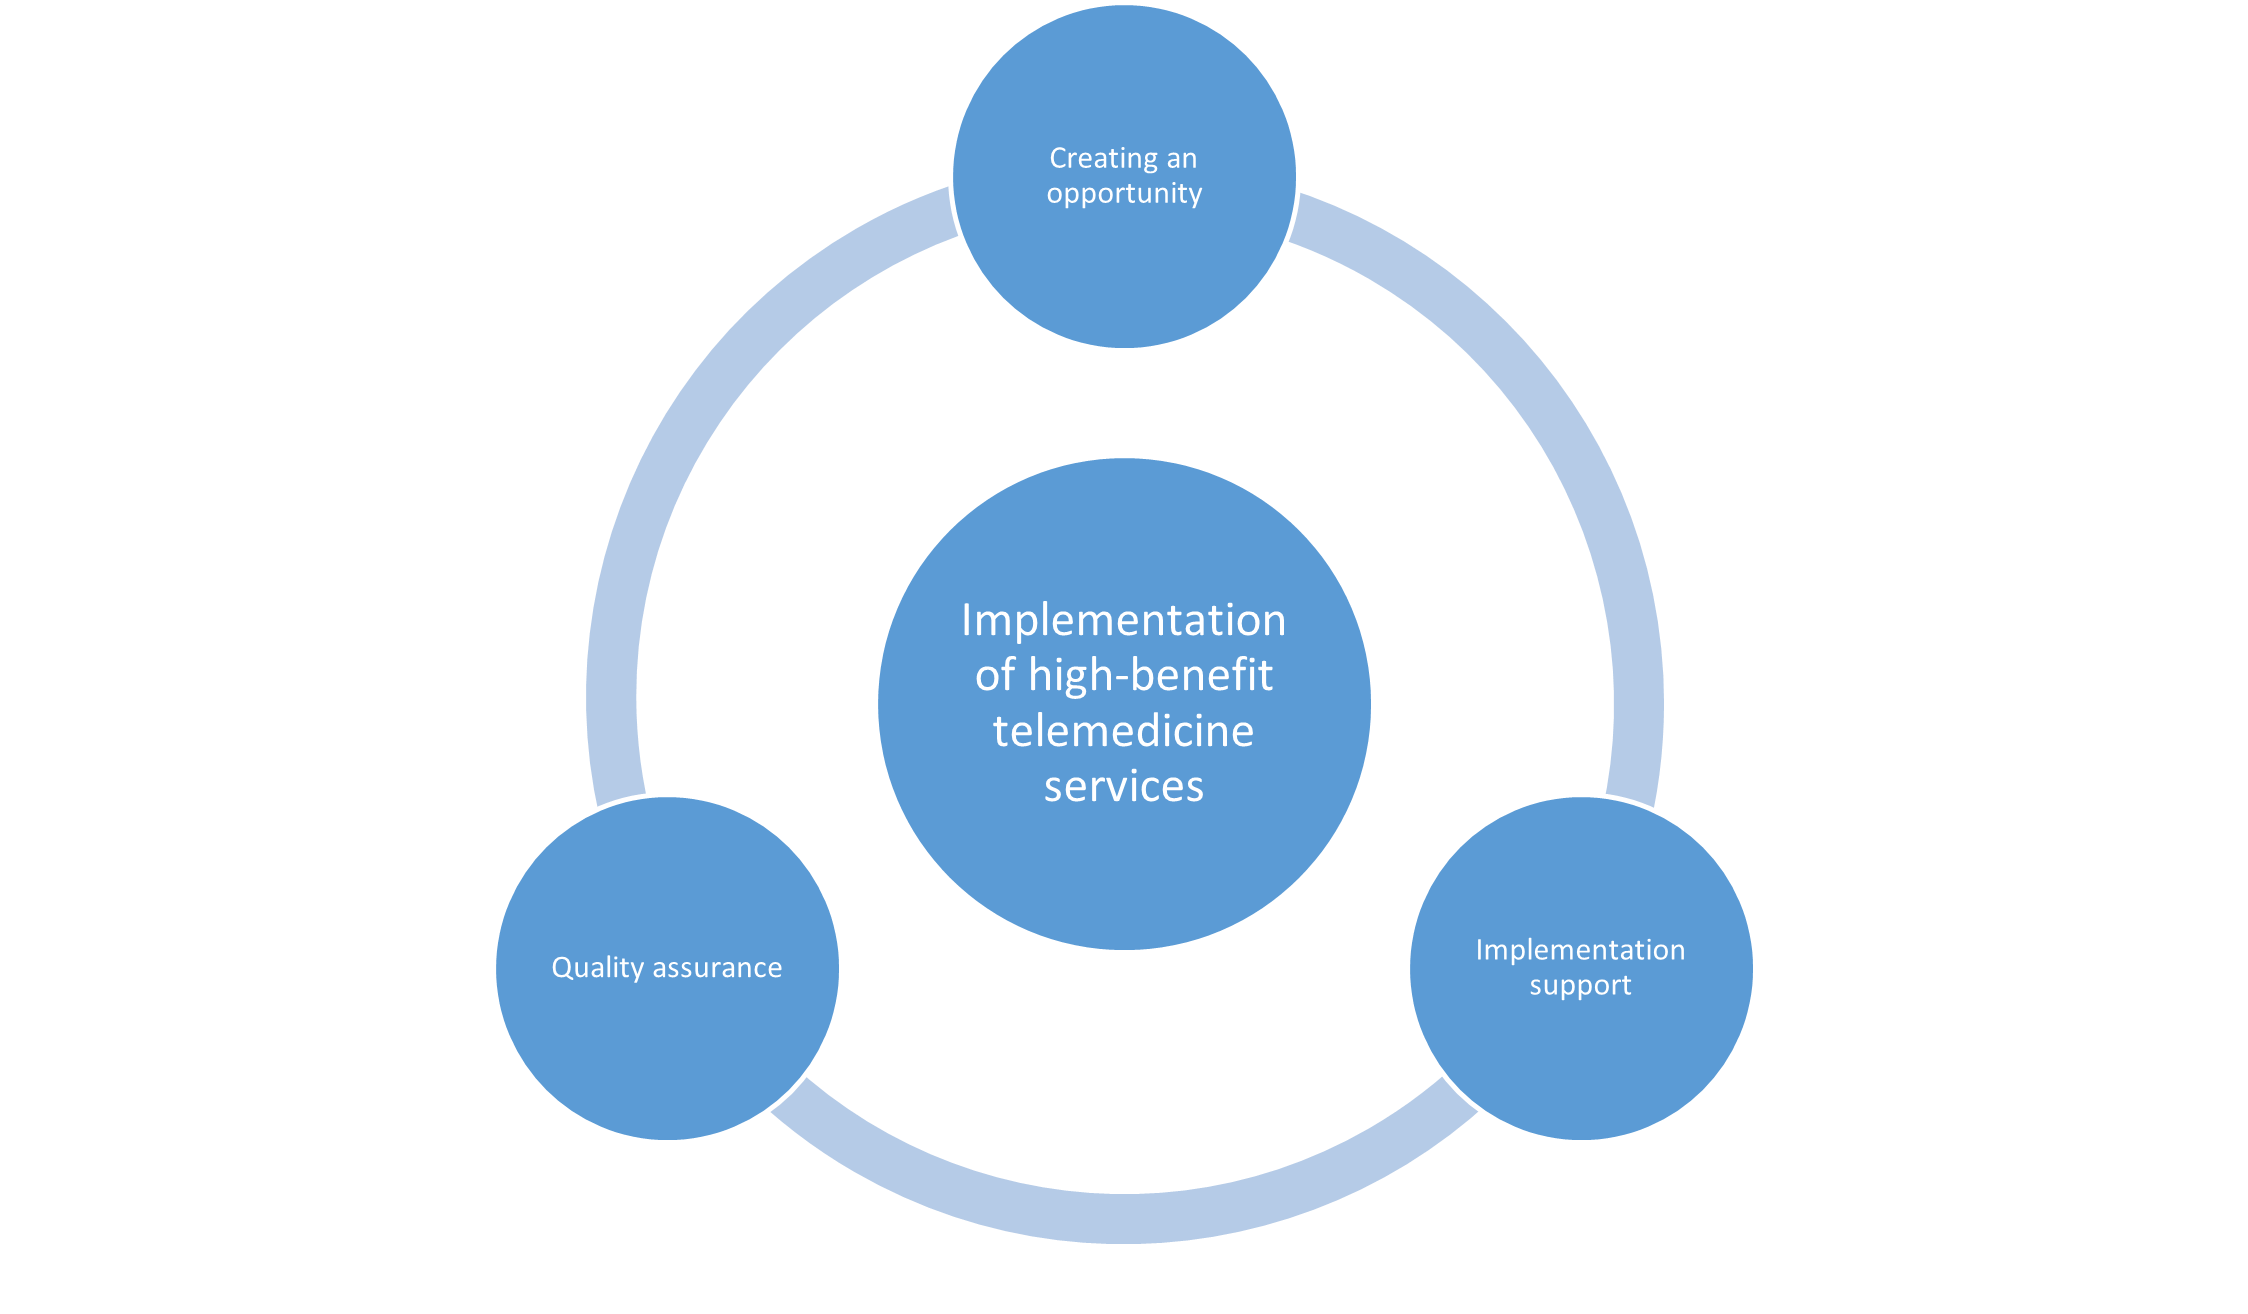 Figure 2. The role of EHIF in the development of telemedicine: creating an opportunity for its implementation through the development of remuneration models; supporting implementation through initial investment sharing; quality assurance through impact assessment and collection of user feedback.